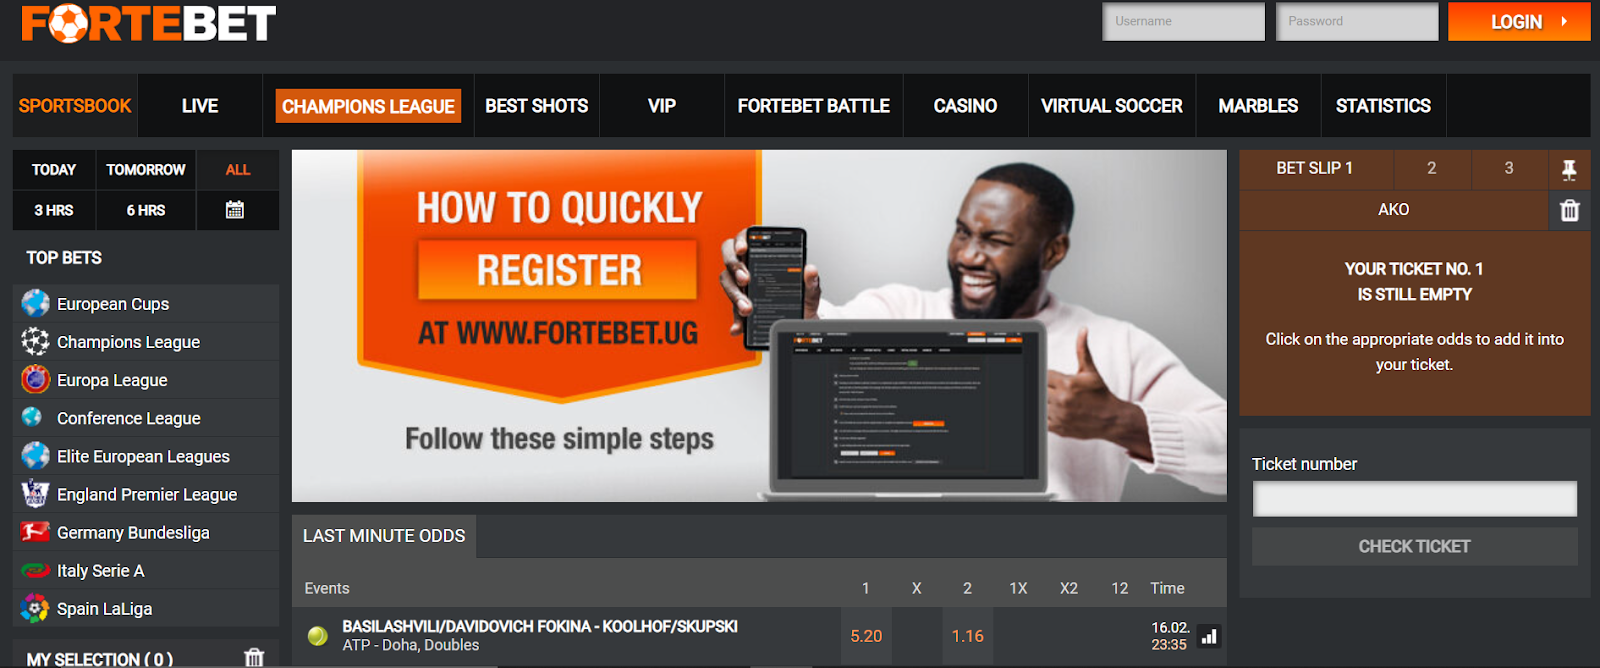 Fortebet alluring its customers to register and win big on betting.